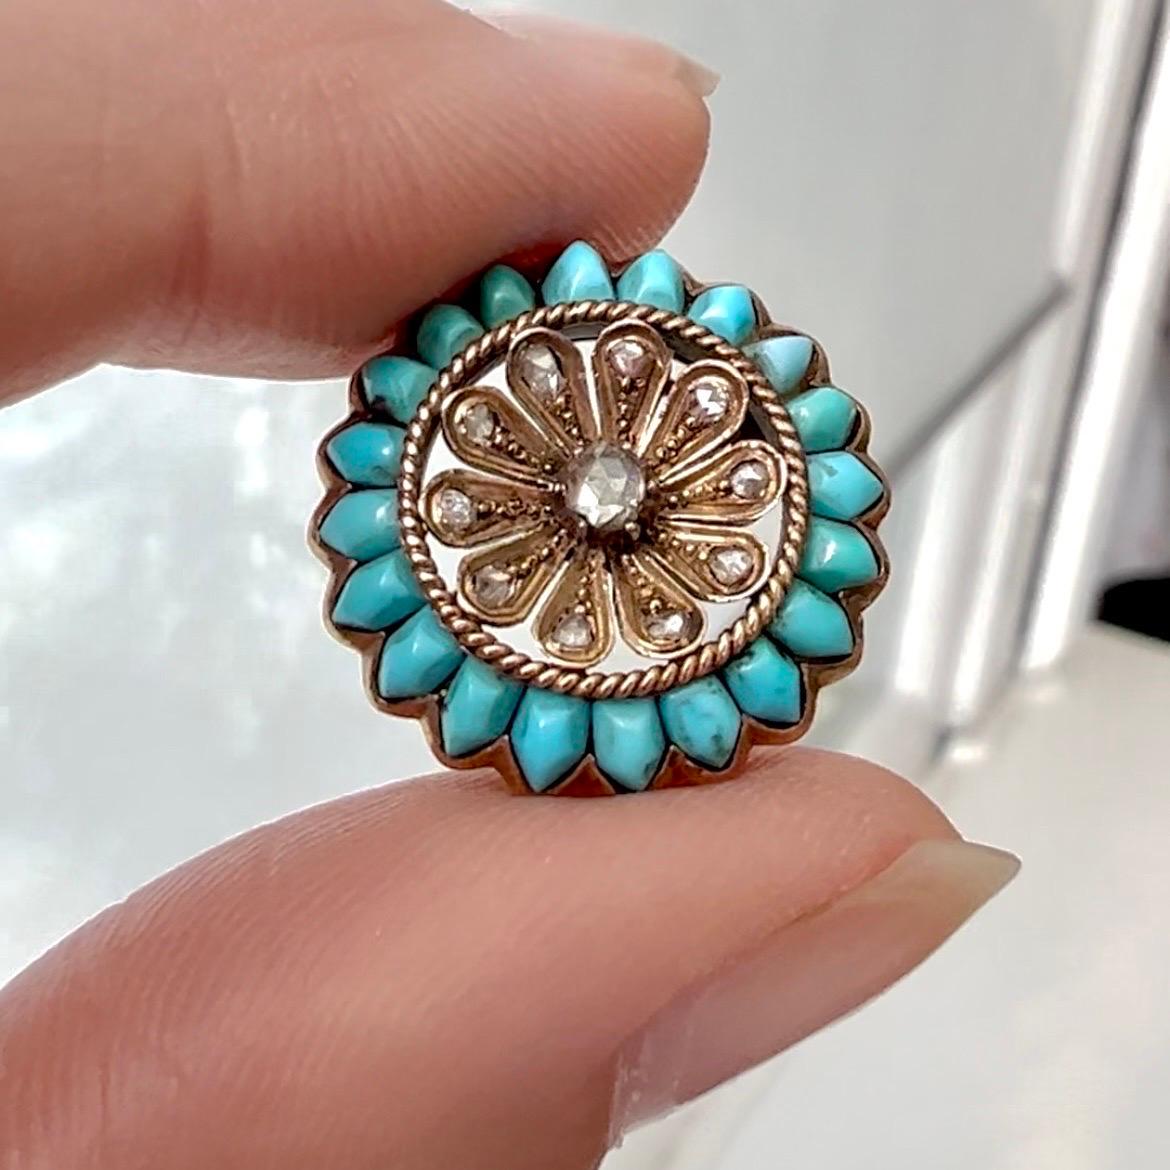 So beautiful! An antique Victorian flower brooch pin set with rose cut diamonds and turquoise cabochon stones. The eleven rose cut diamonds - which are reminiscent of seeds - are haloed by twenty lovely turquoise petals. The antique gold brooch is